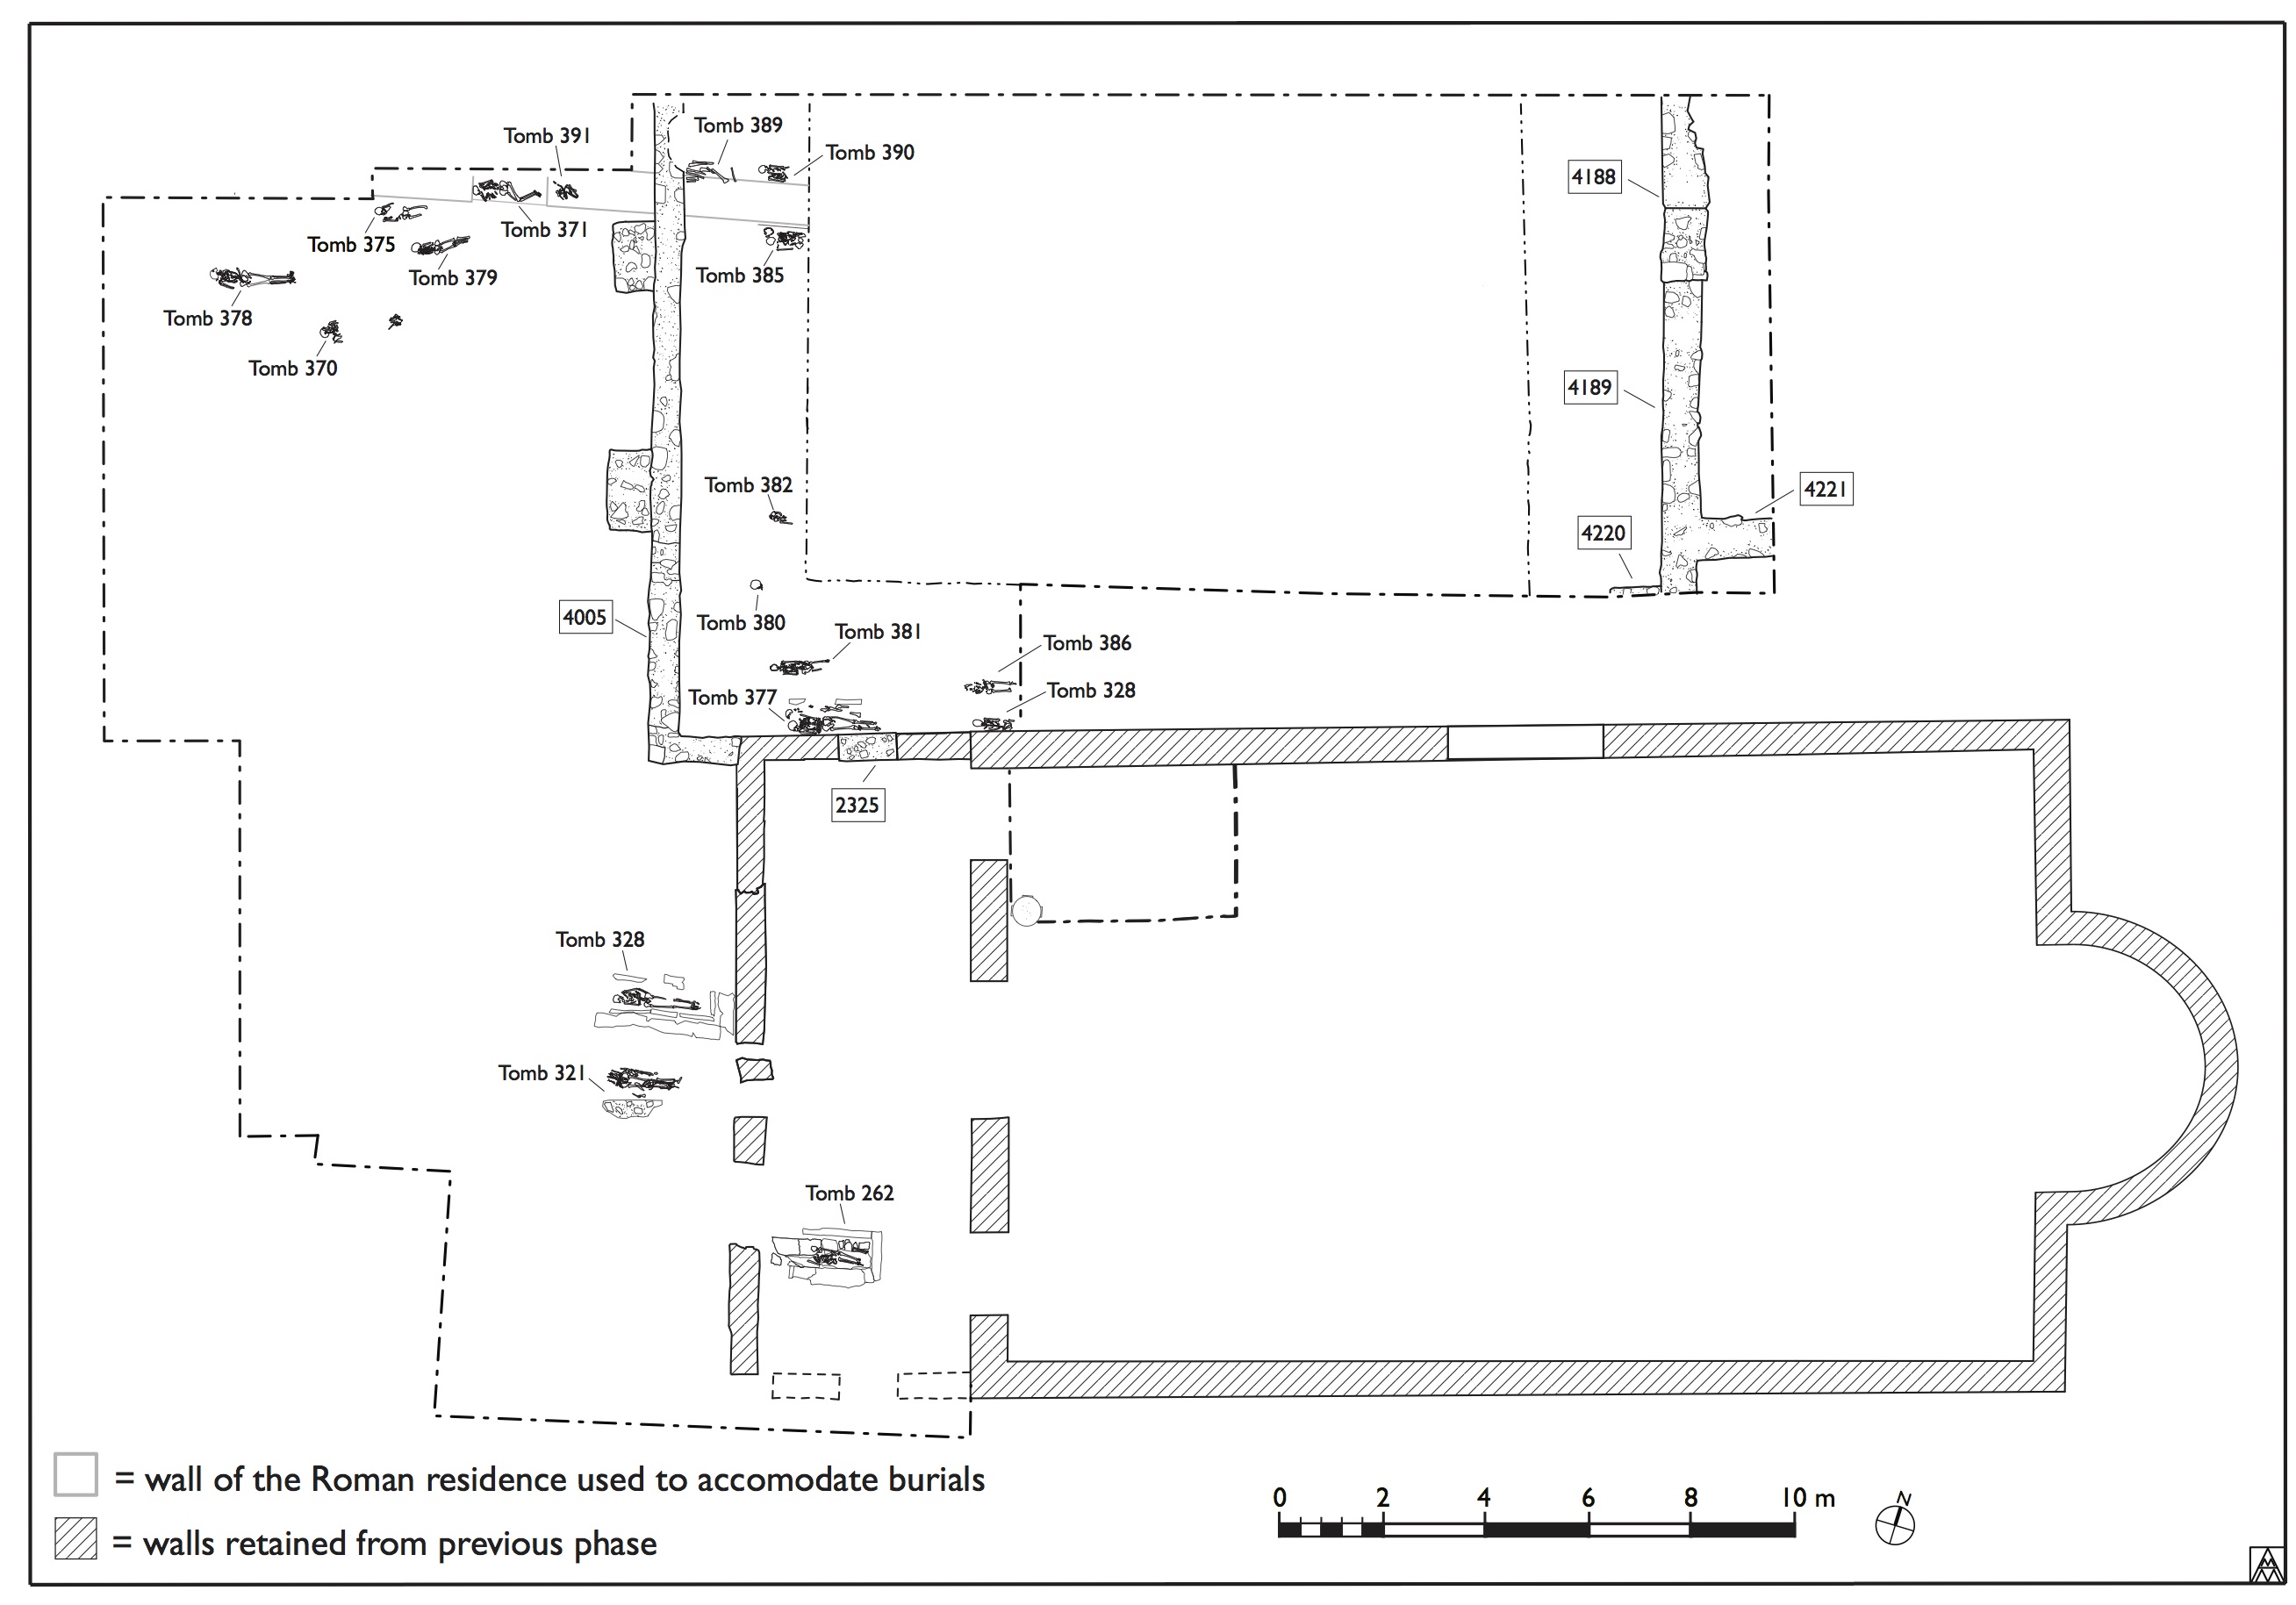 Figure 27. Plan of the area in the Central Medieval 1 (Margaret Andrews).